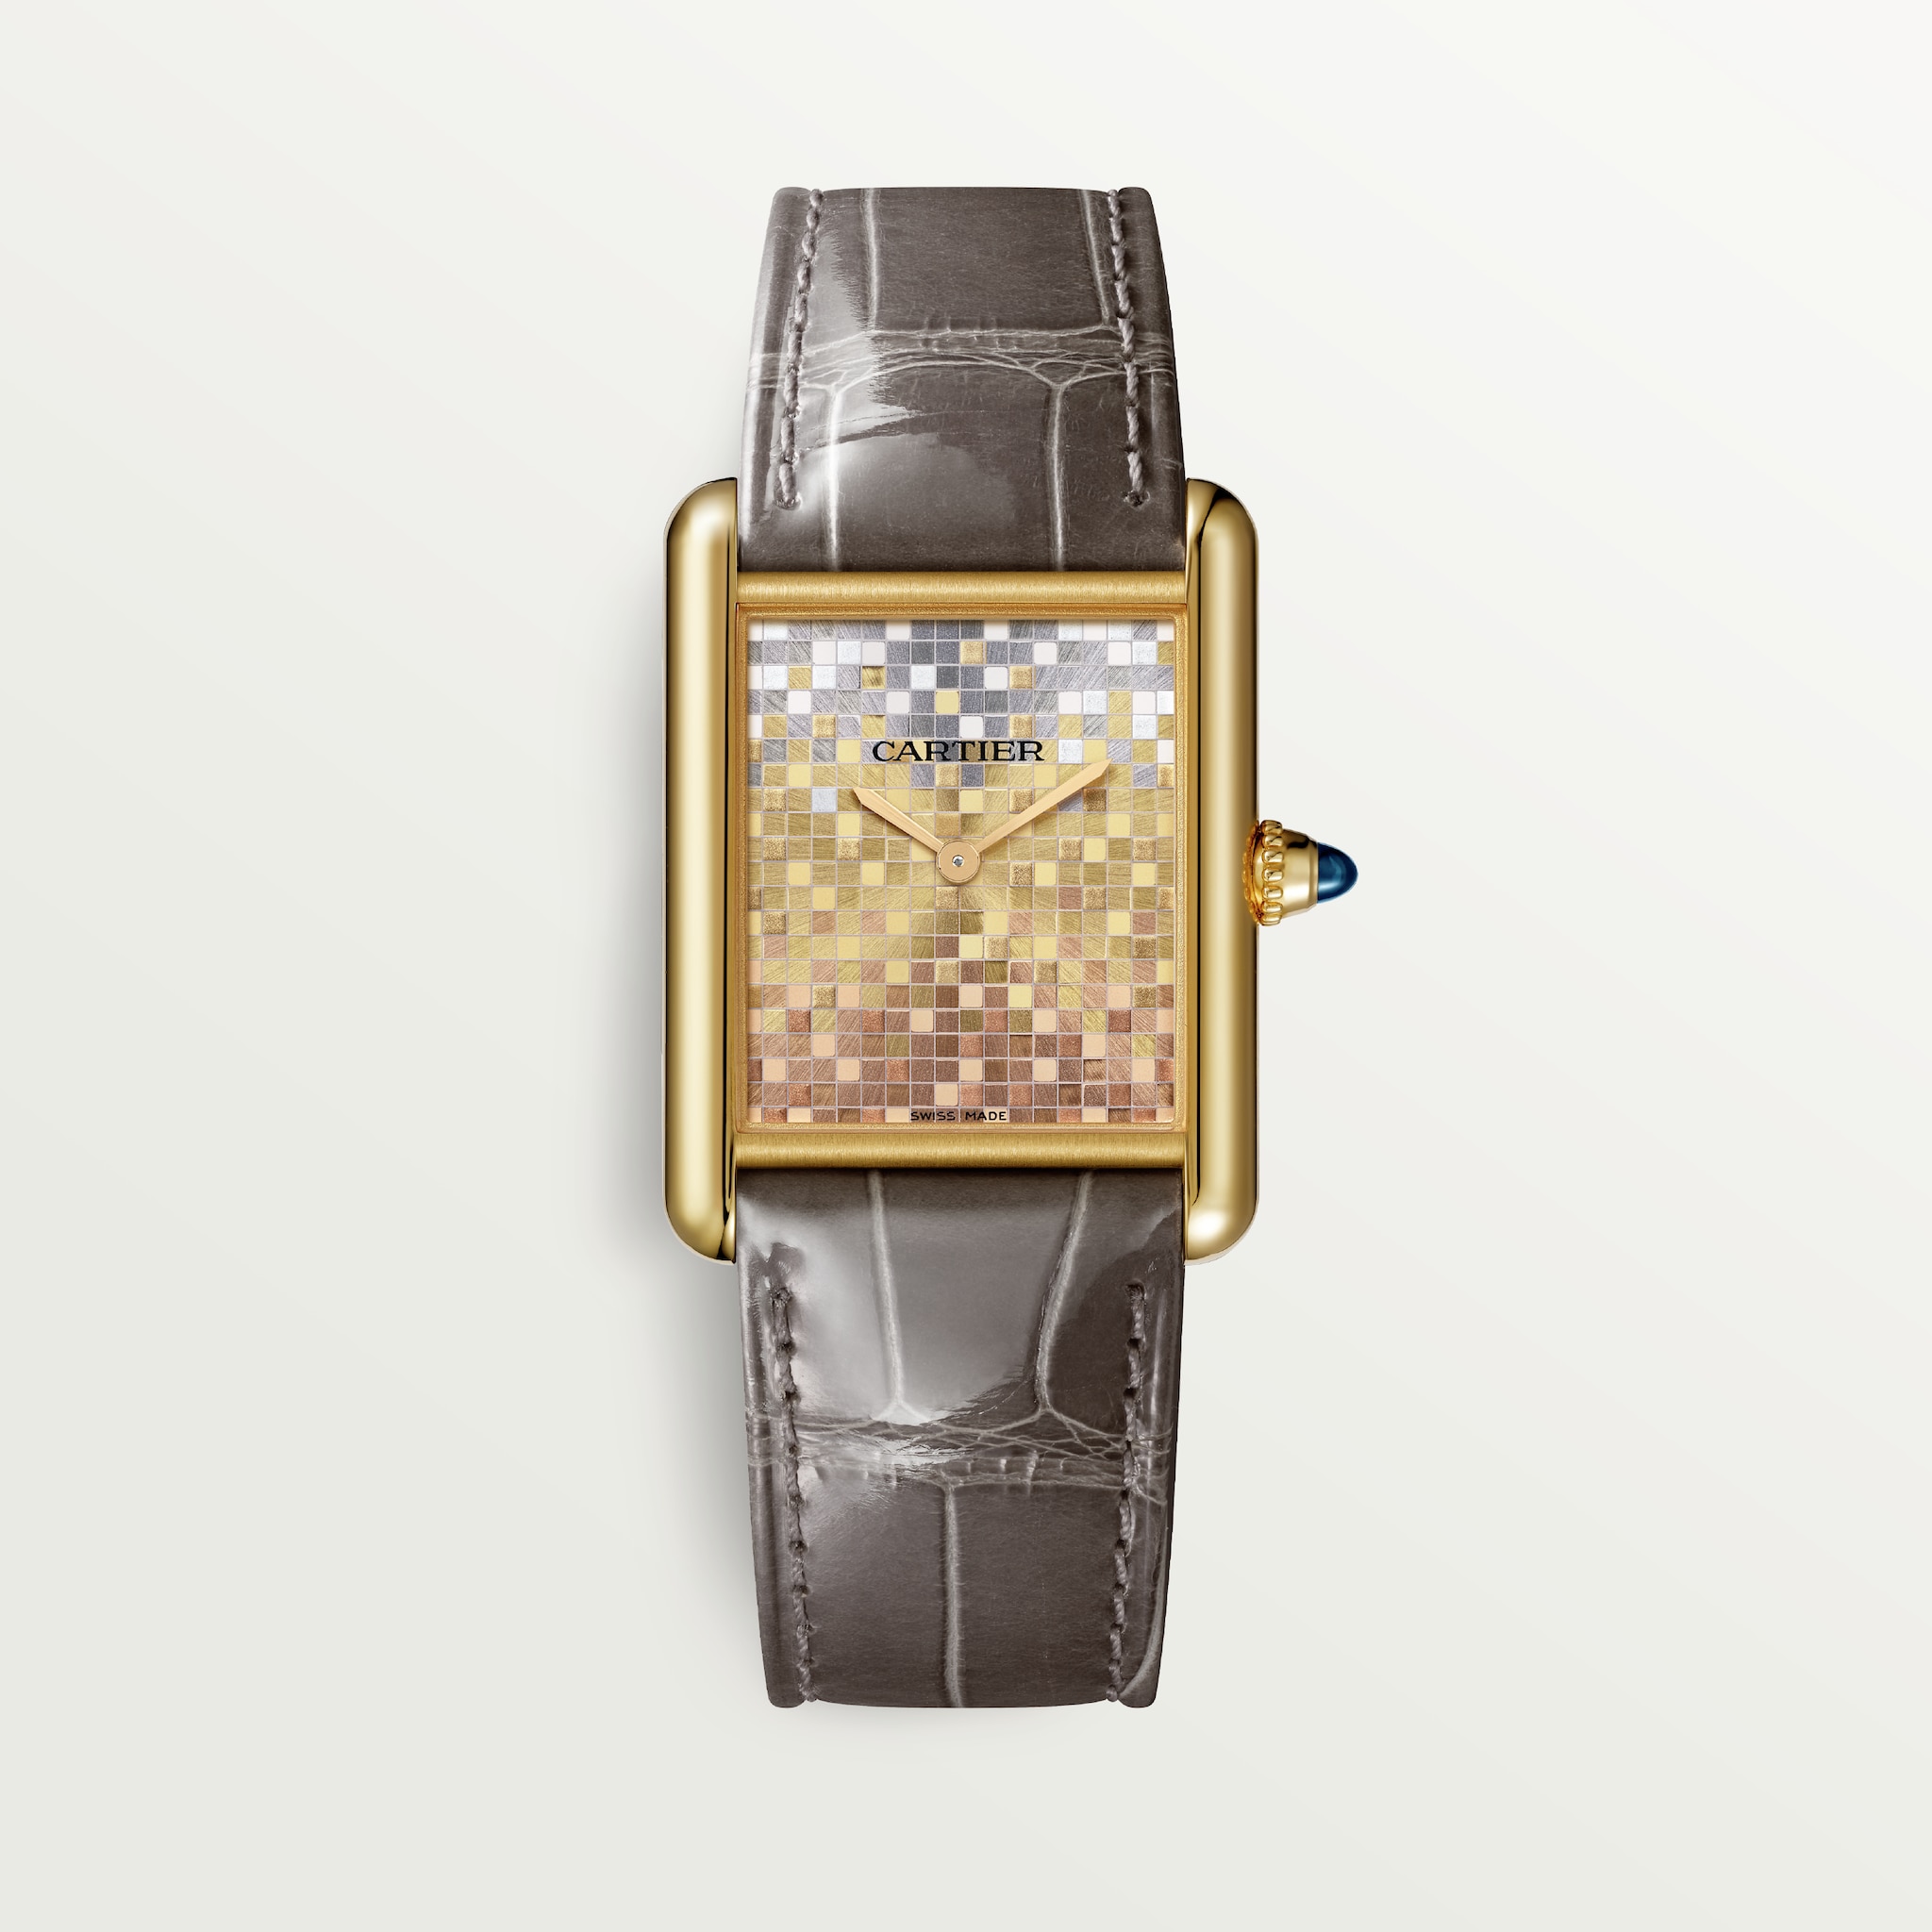 Tank Louis Cartier watchLarge model, hand-wound mechanical movement, yellow gold, leather